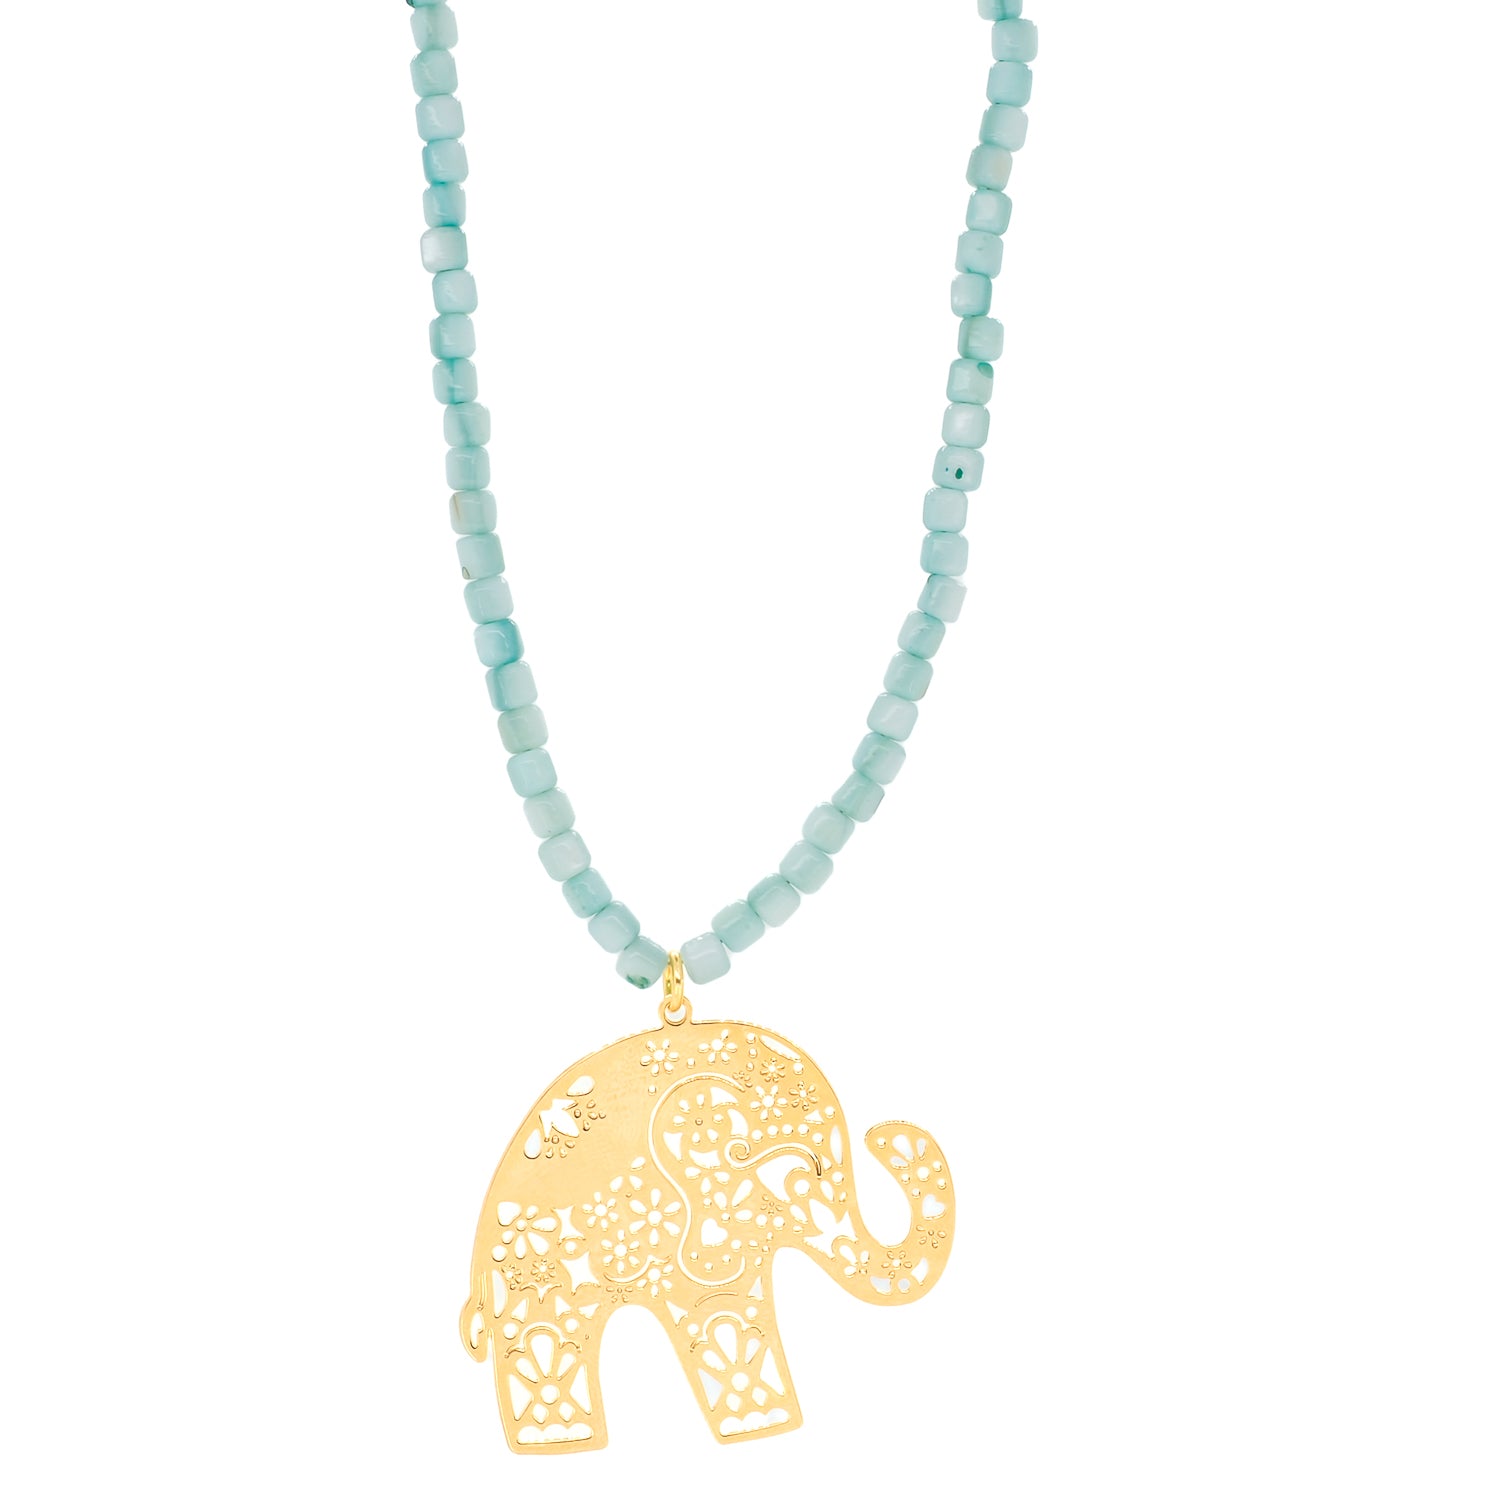 Bohemian Elephant Necklace with Blue Pearl Crystal Beads and Gold Plated Elephant Pendant